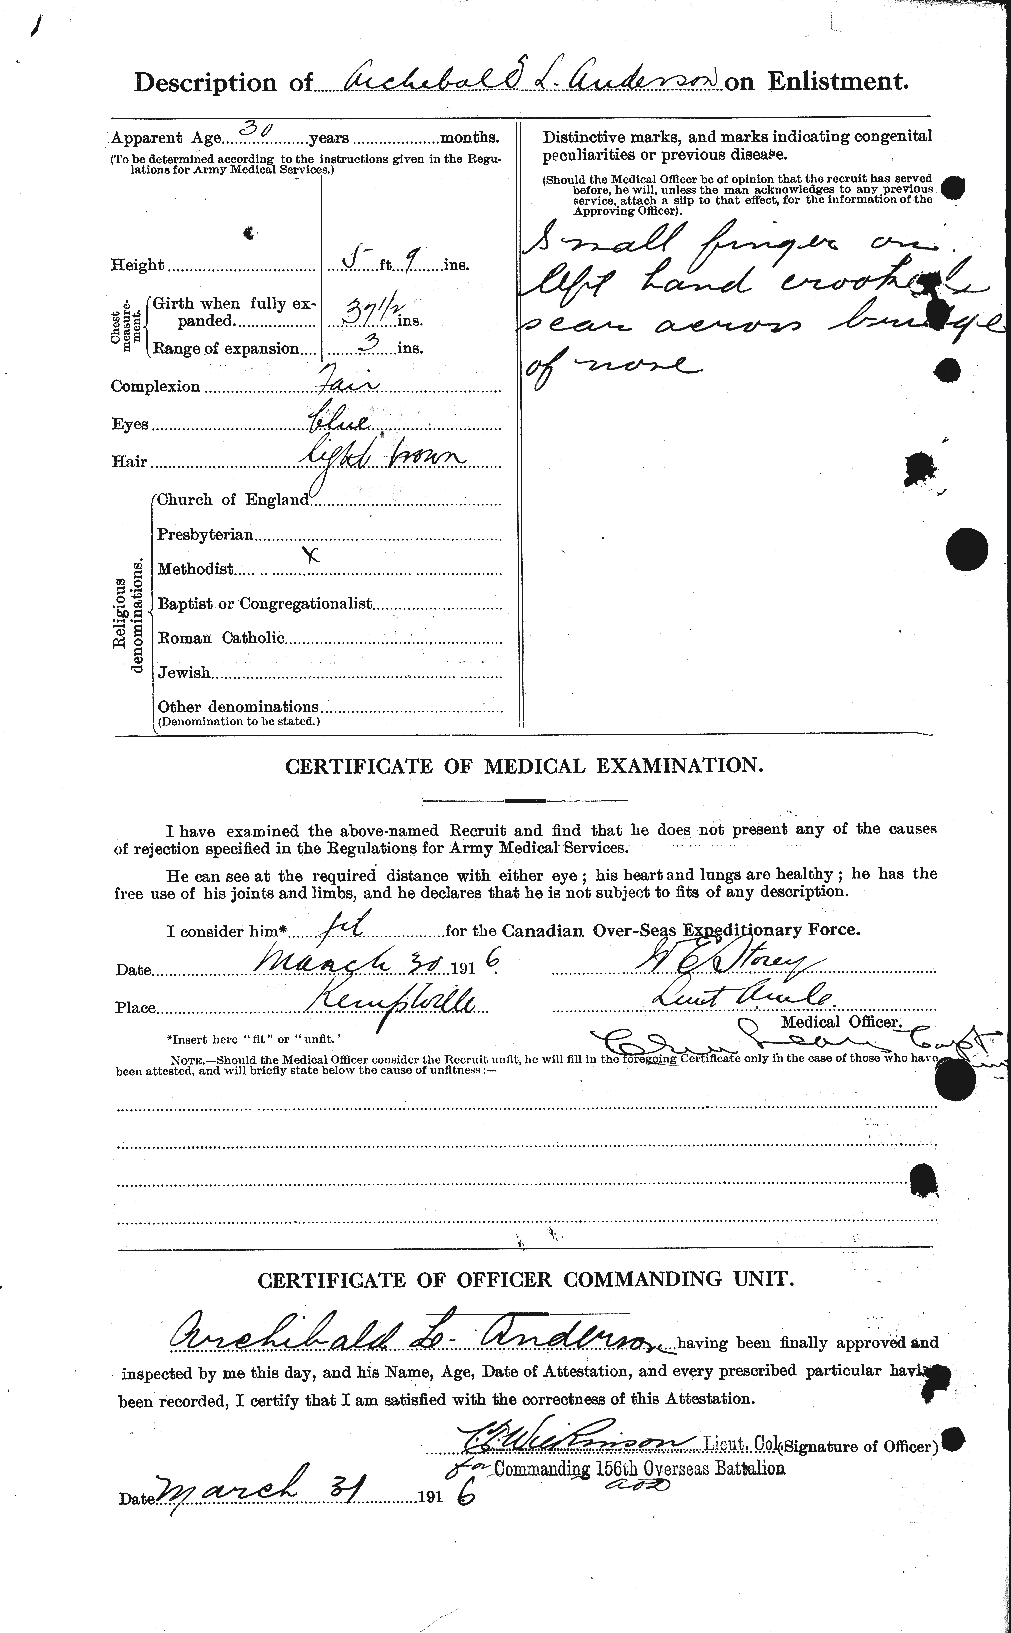 Personnel Records of the First World War - CEF 209341b